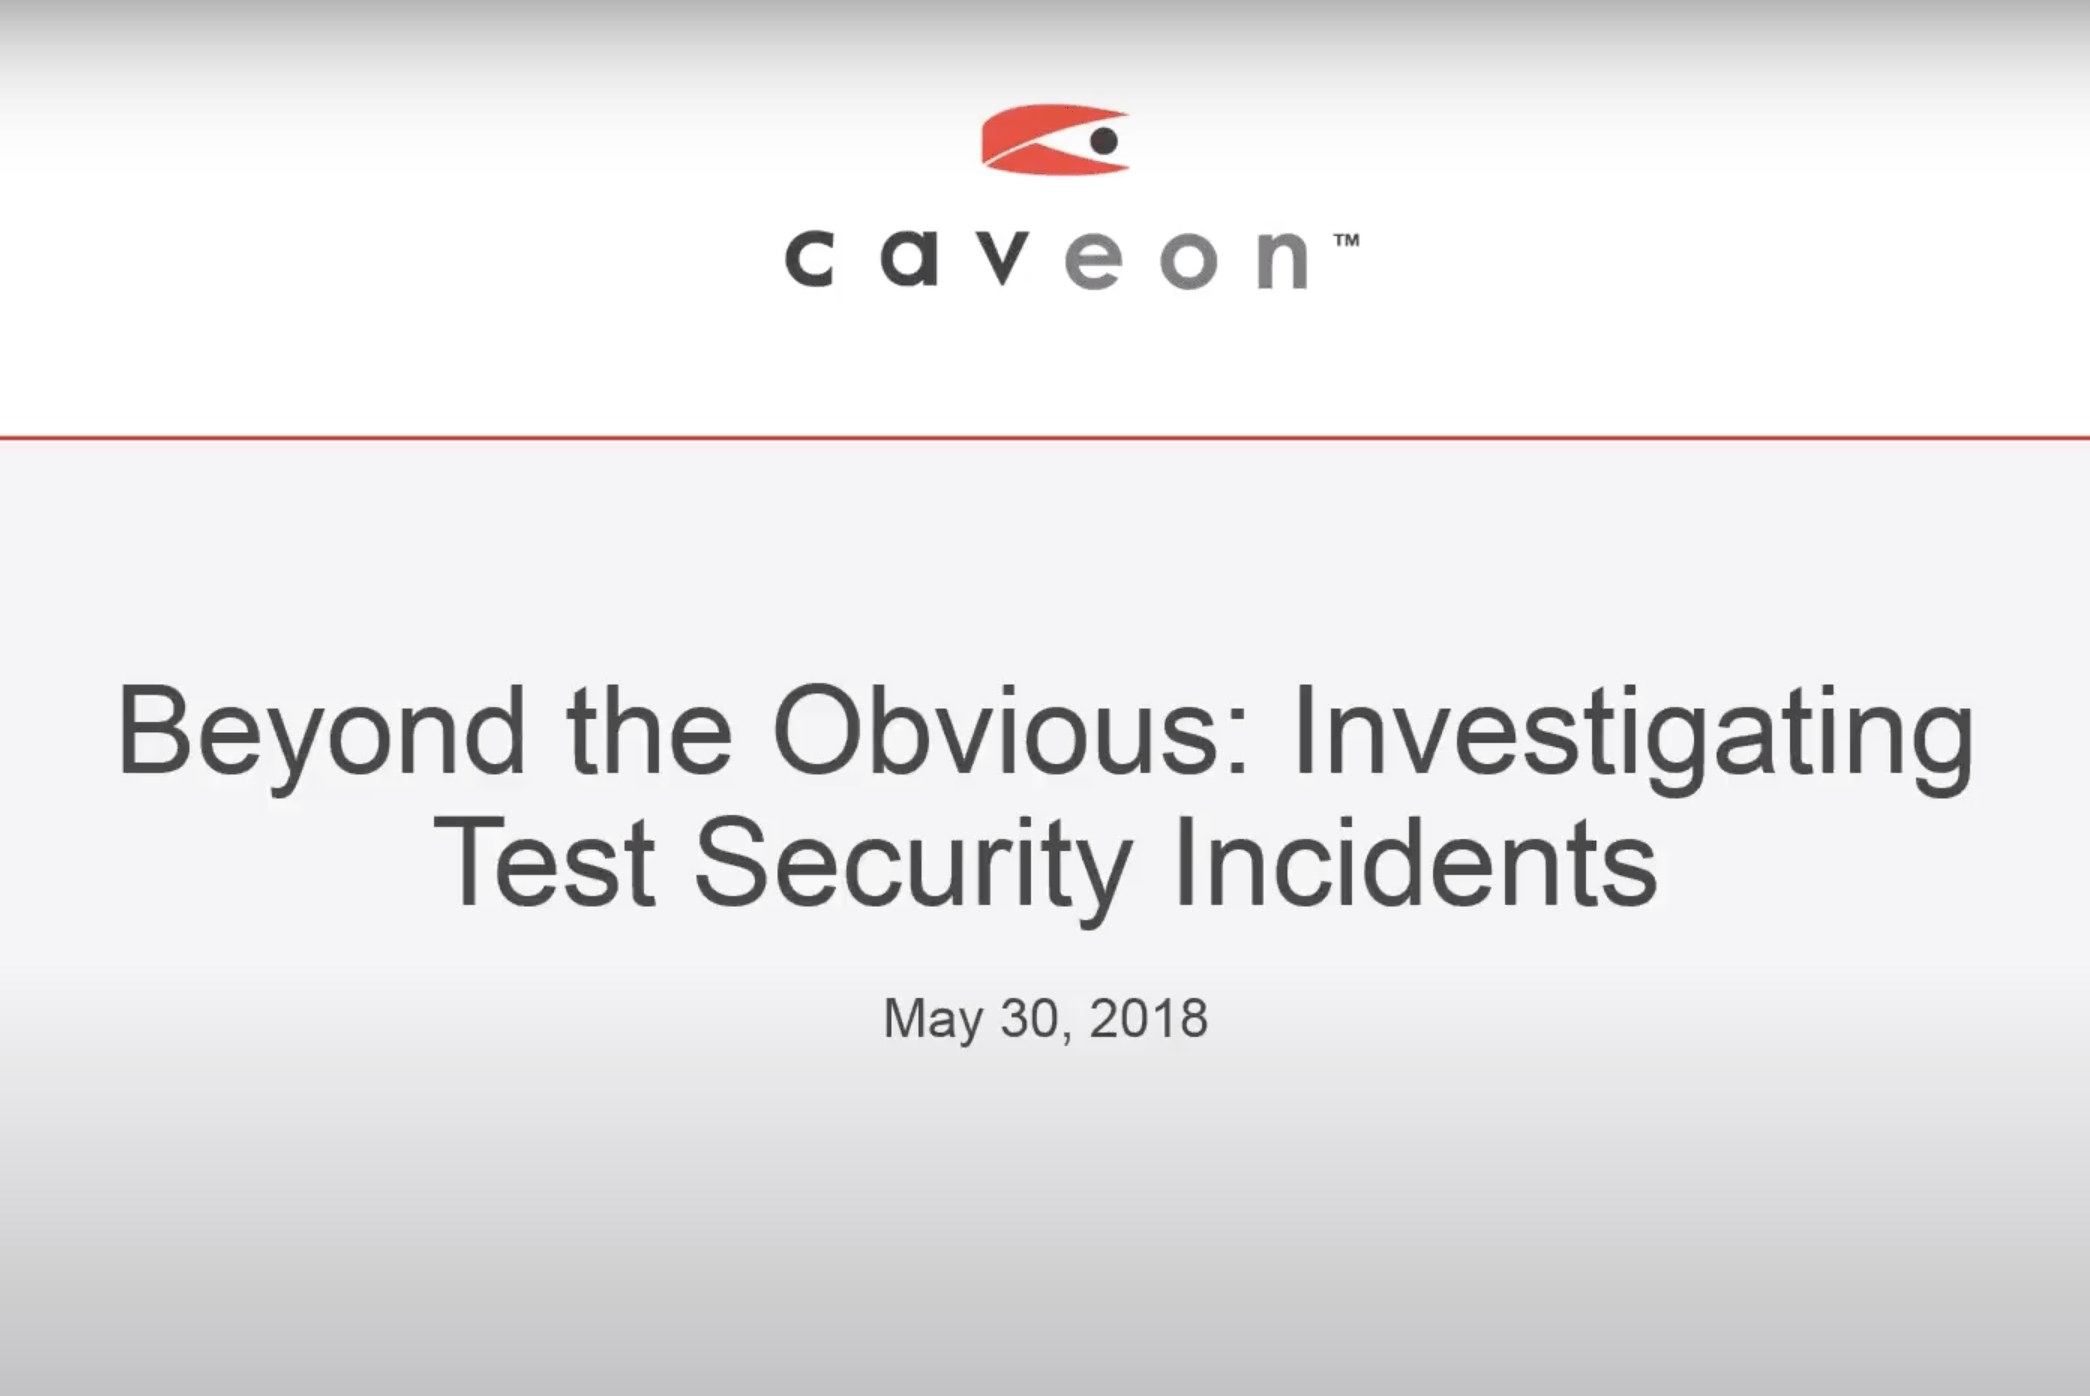 Beyond the Obvious: Investigating Test Security Incidents